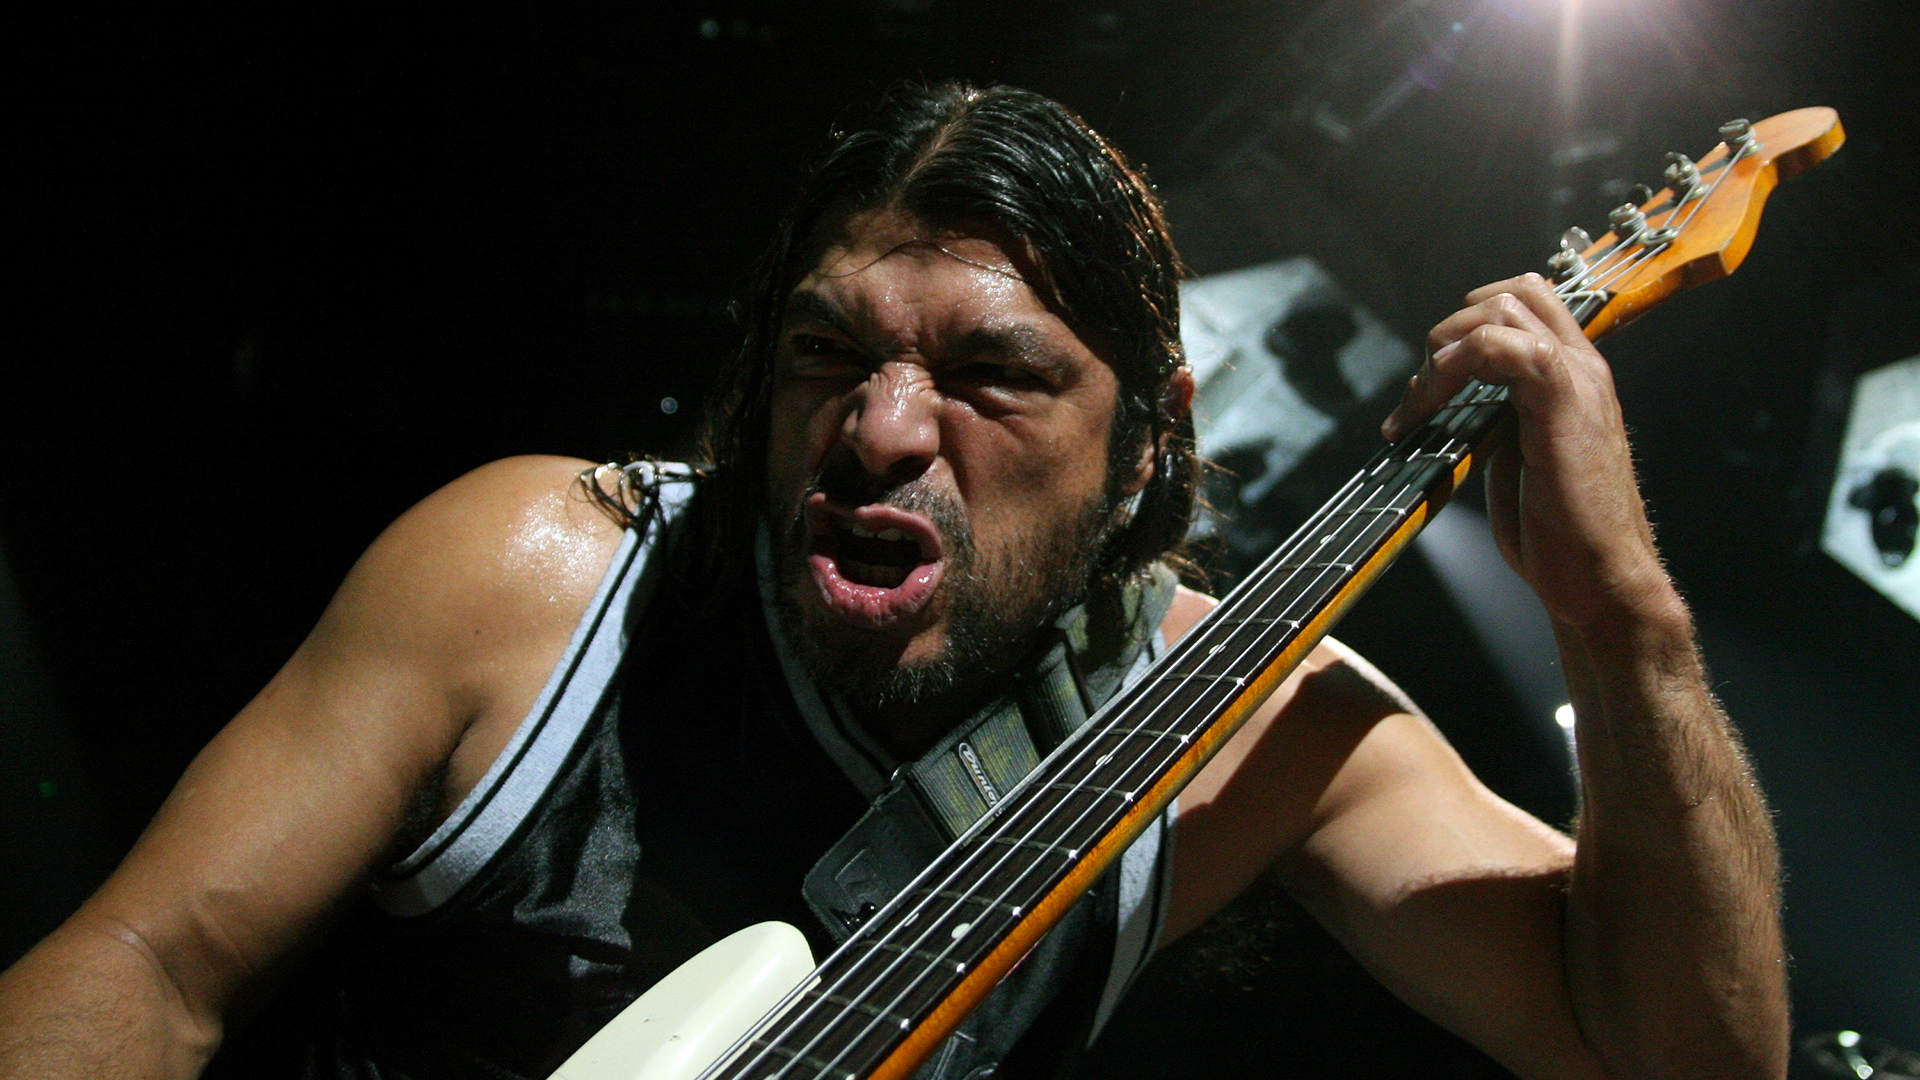 “It’s a primal, unconscious reaction. An honor bestowed upon only the best riffs”: What’s the science behind a stank face riff? We asked everyone from Mike Stringer to Periphery and Nik Nocturnal to define metal guitar’s ultimate accolade